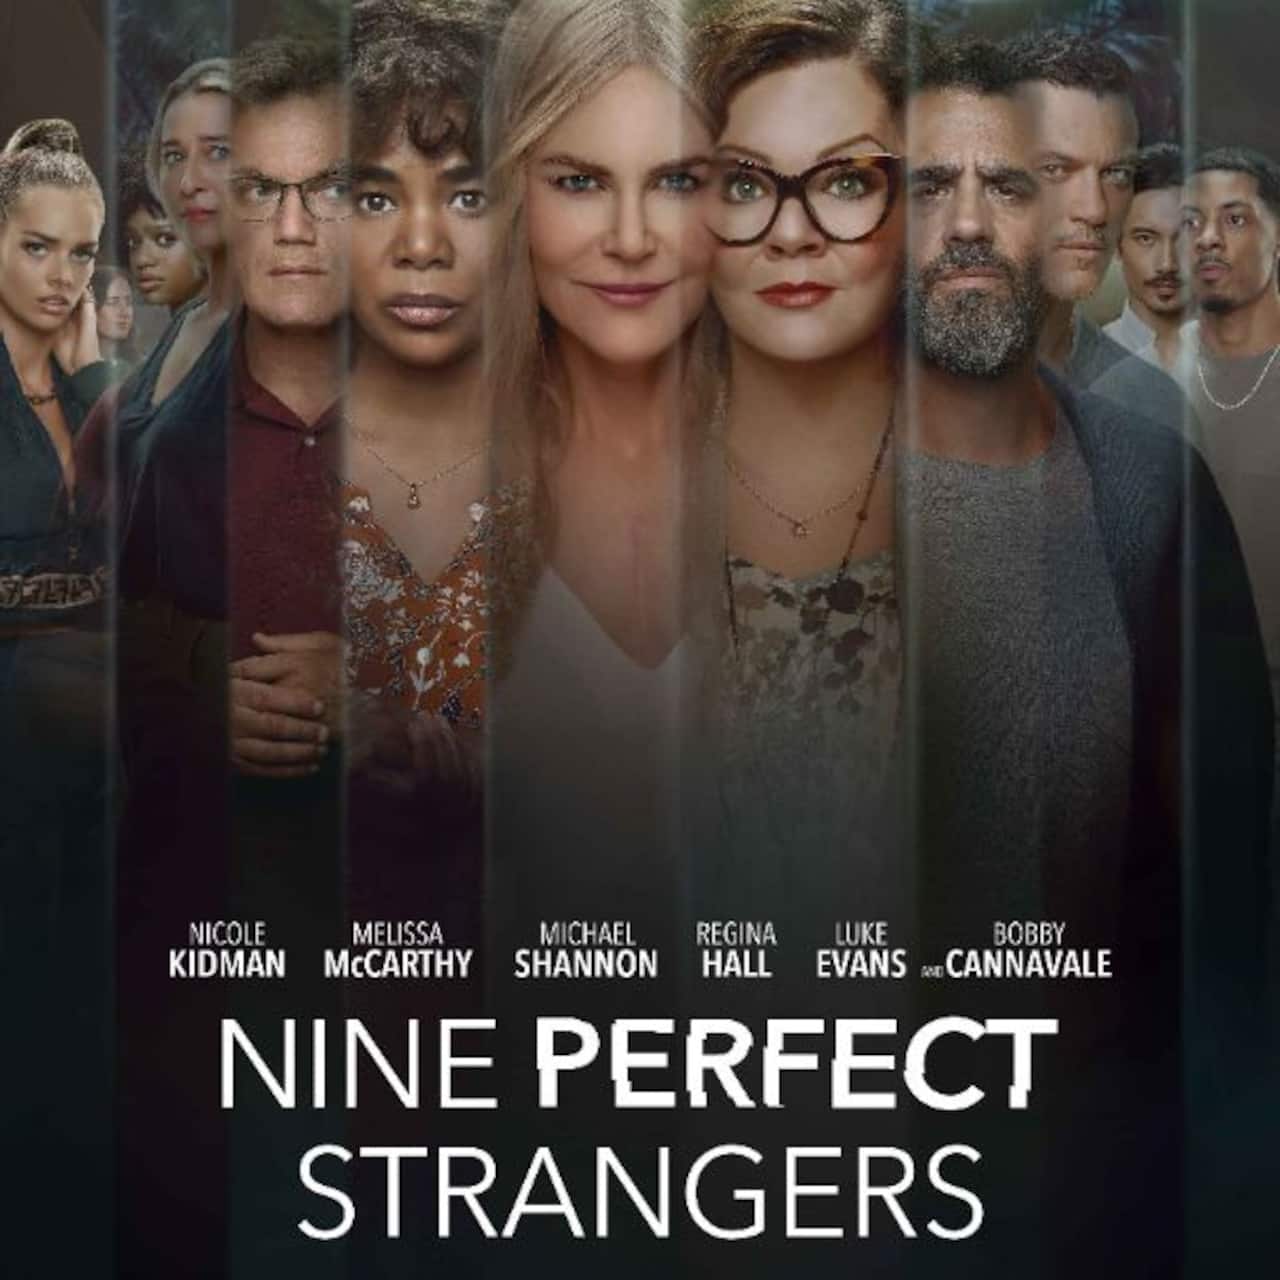 Nine Perfect Strangers trailer: Nicole Kidman, Melissa McCarthy, Luke Evans and other Hollywood heavyweights come together for this psychological mind-bender; RELEASE DATE out